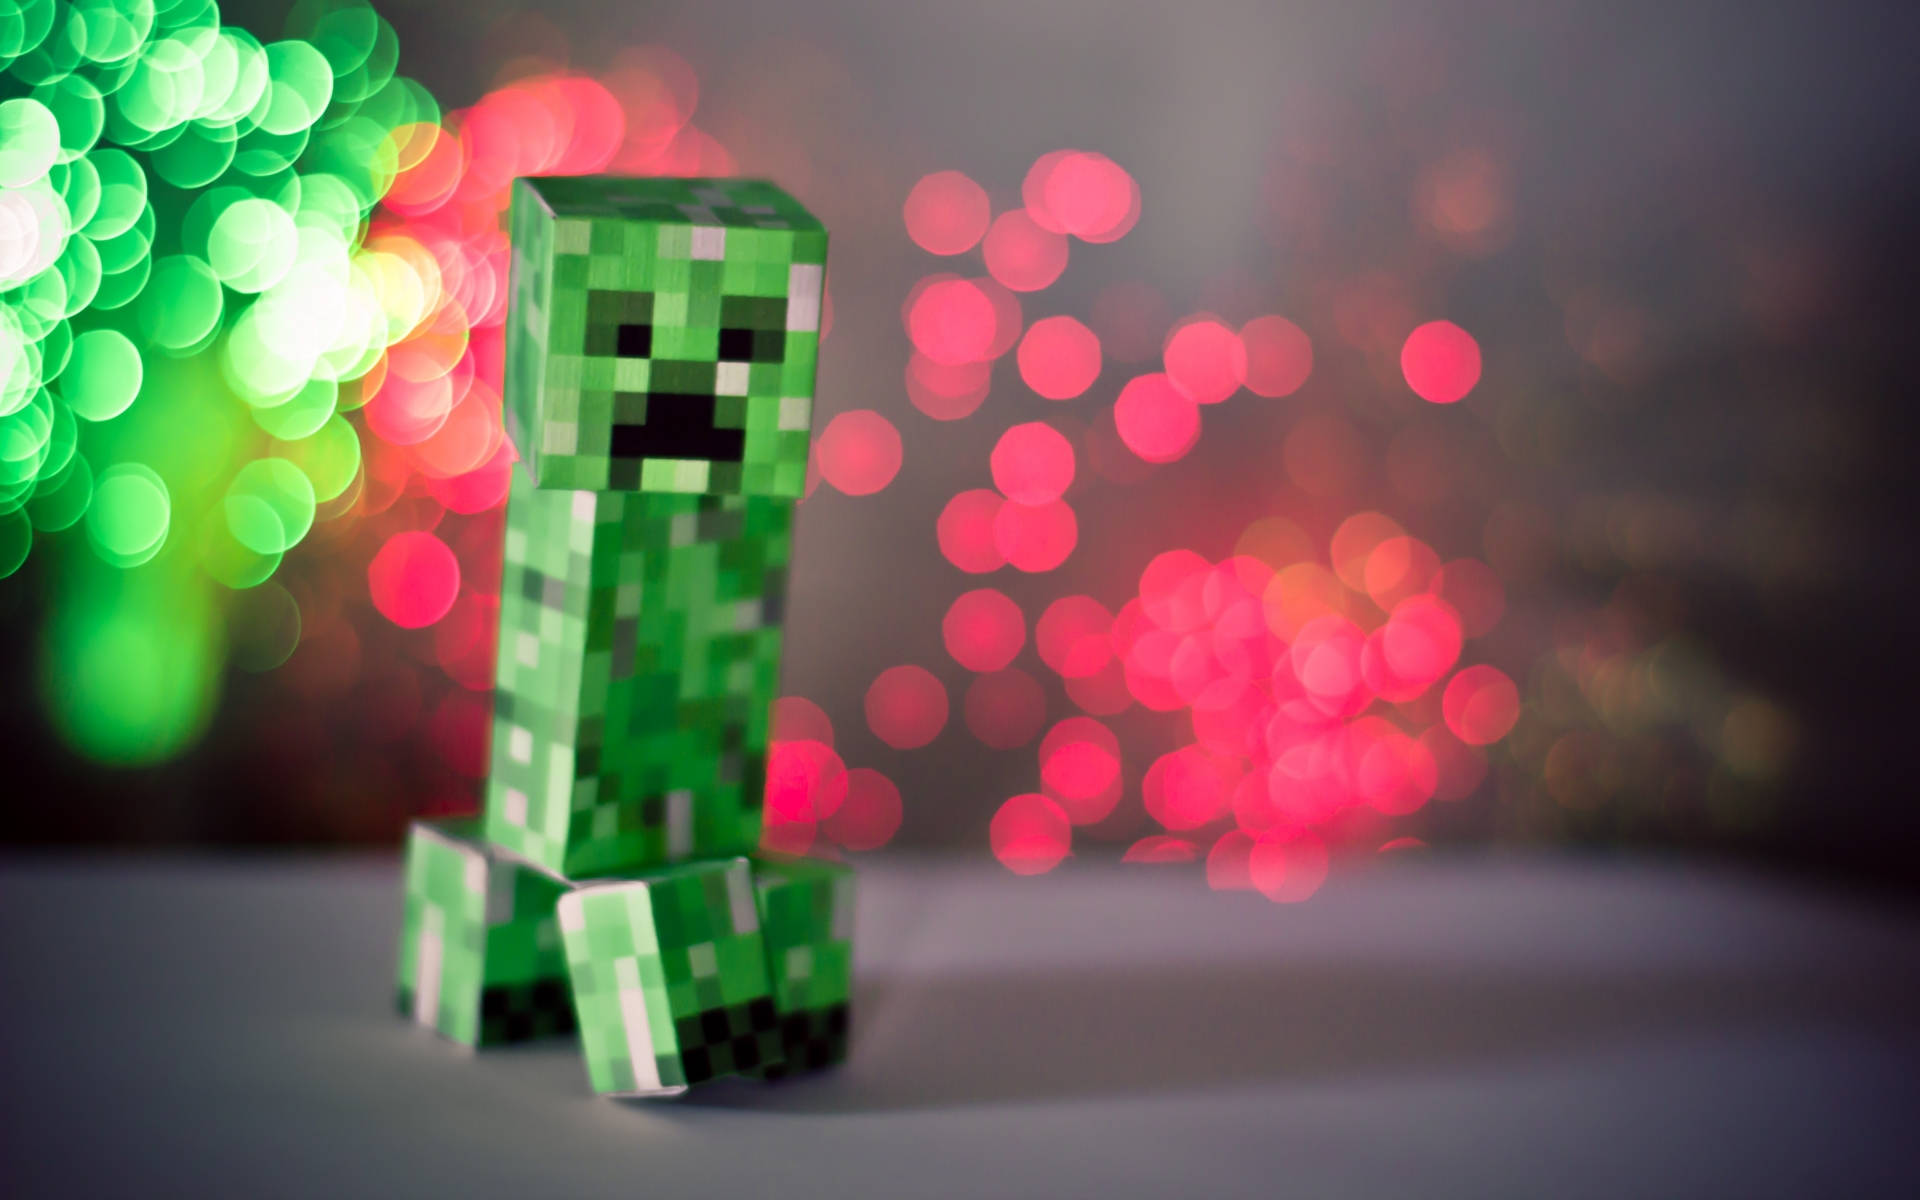 Minecraft Creeper With Blurry Lights Background